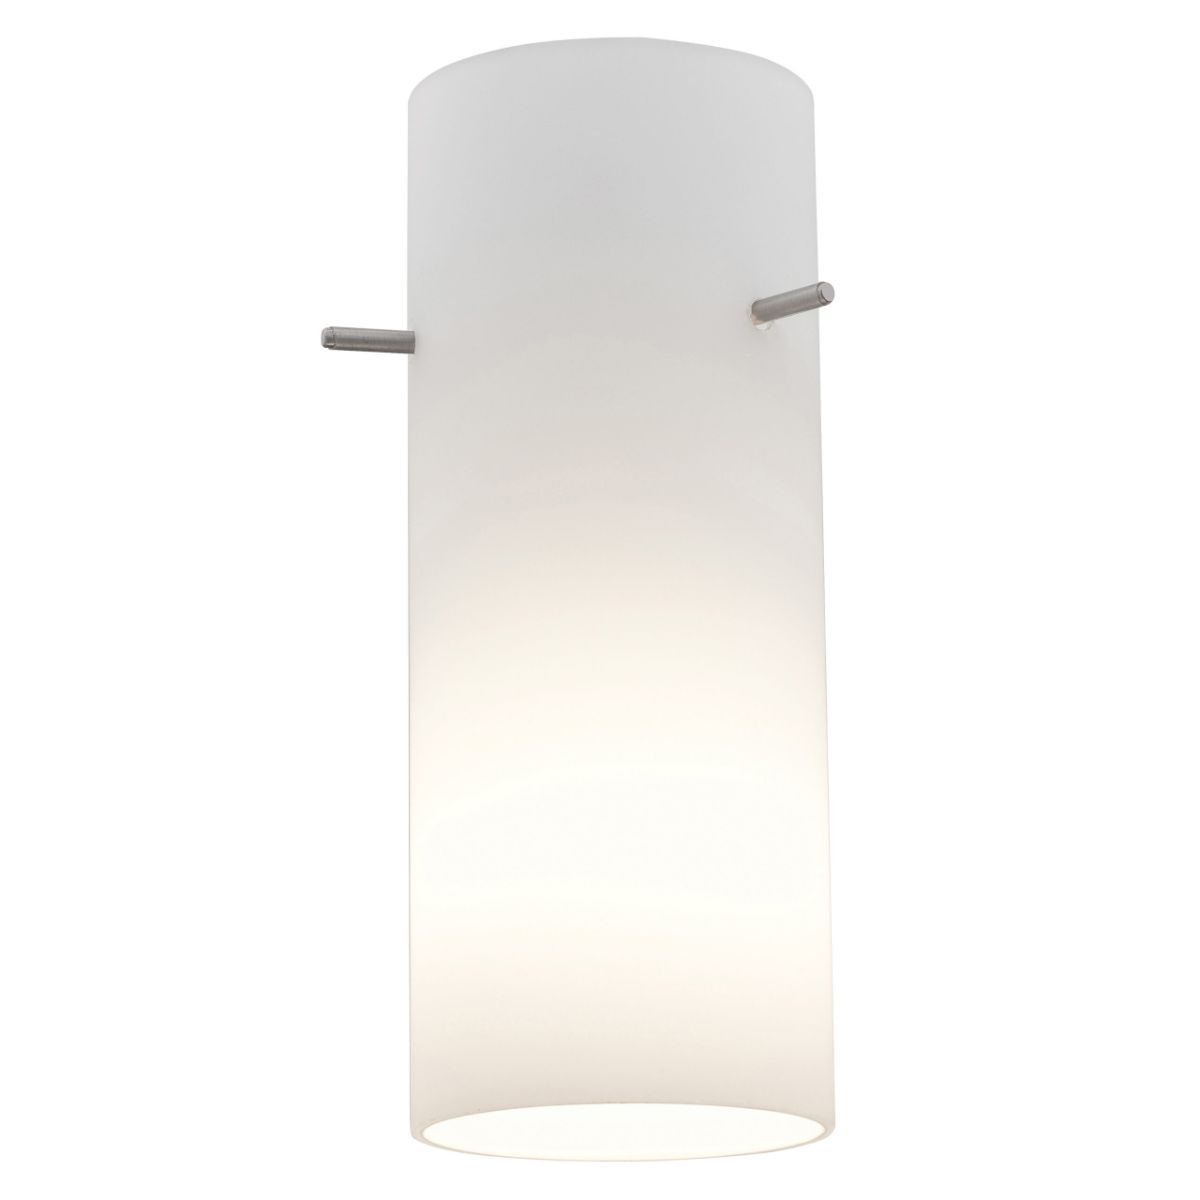 Cylinder 10 in. Opal Glass Pendant Shade with 4 in. Fitter